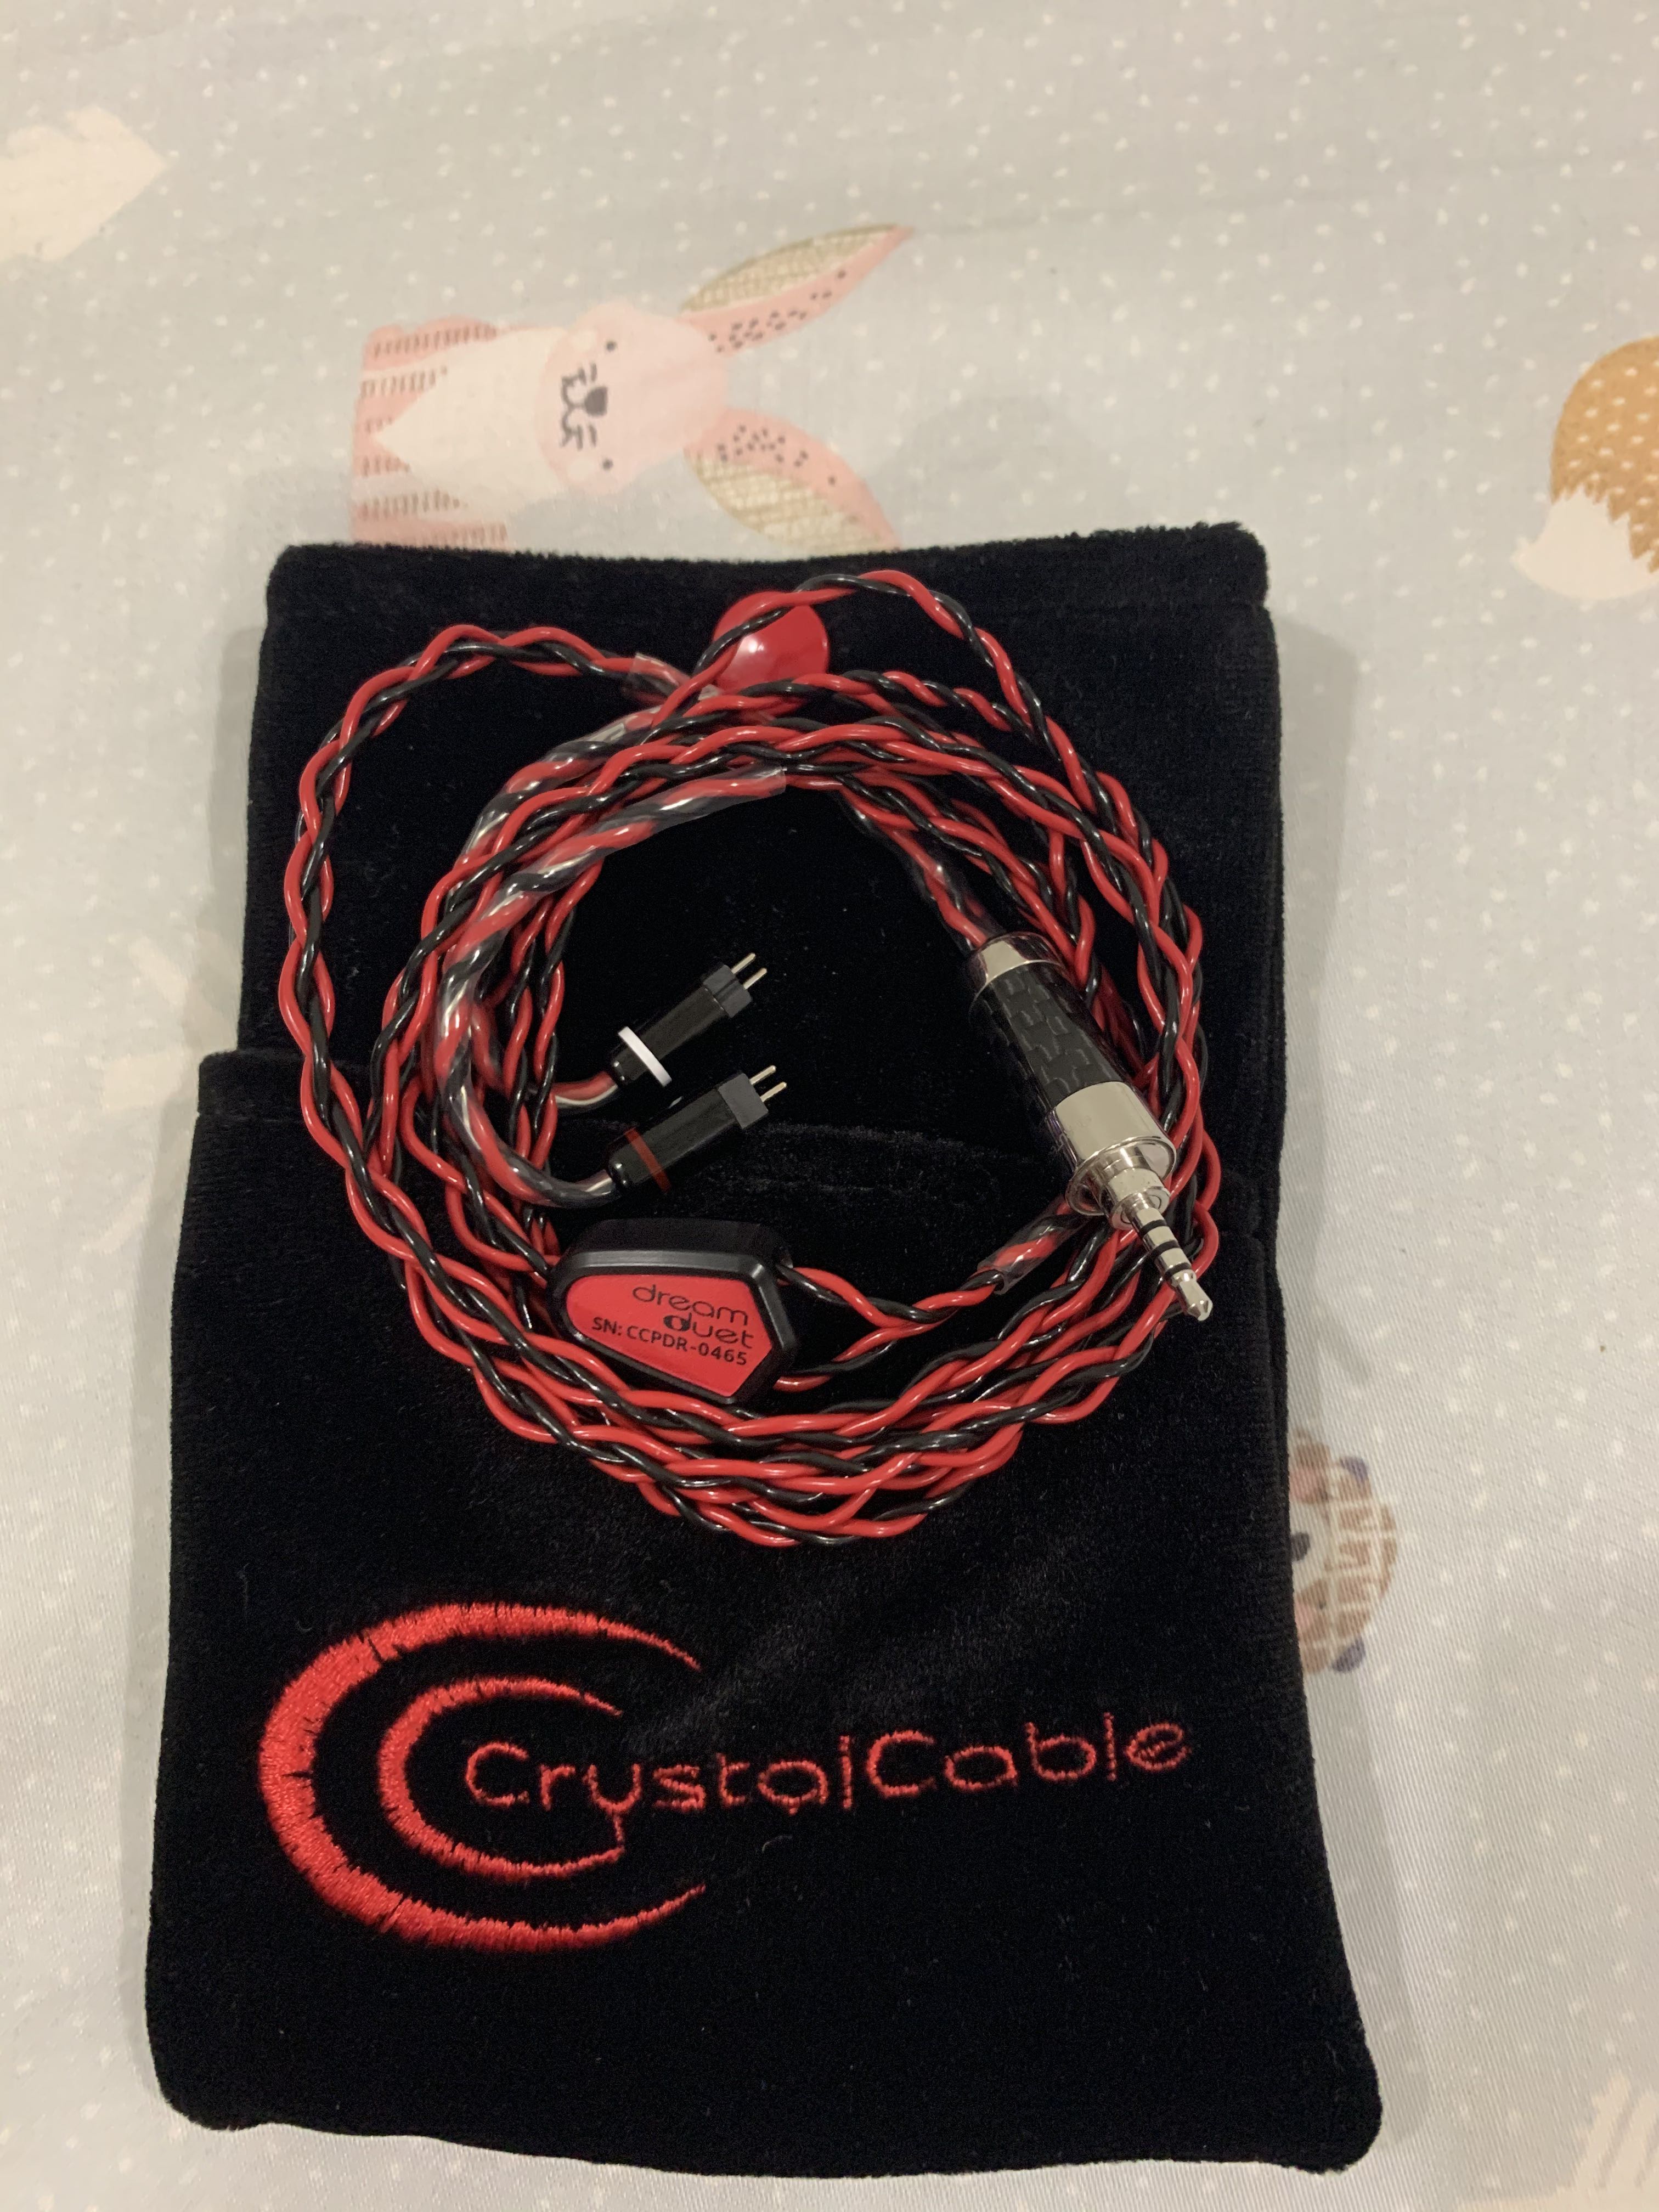 Duet Series - Crystal Cable